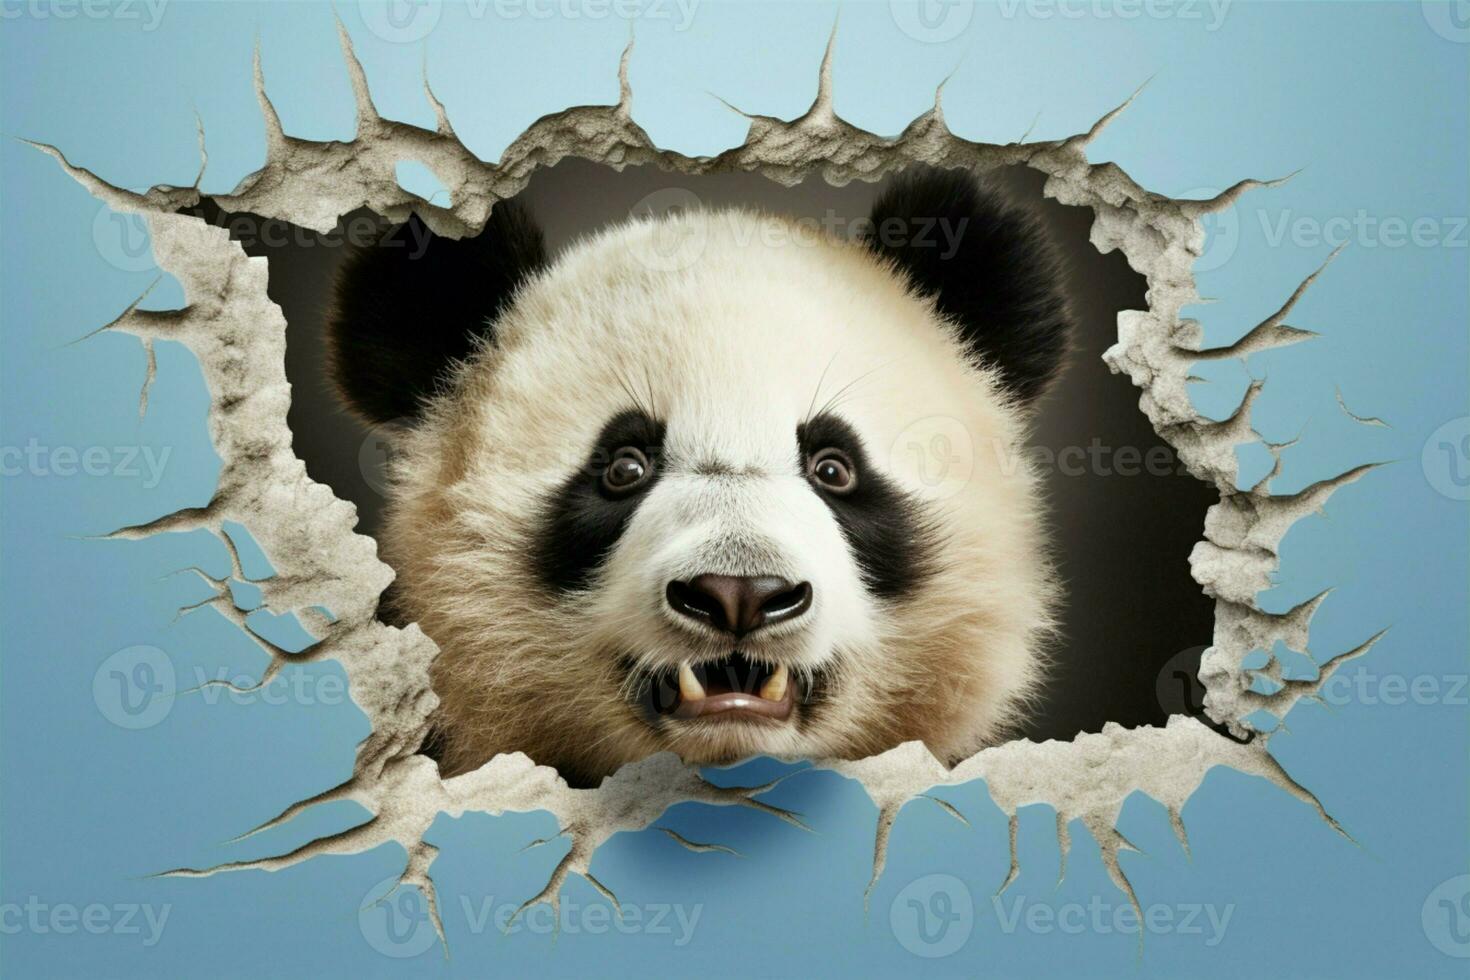 Pandas adorable face pops through torn wall perfect for mockup framing AI Generated photo